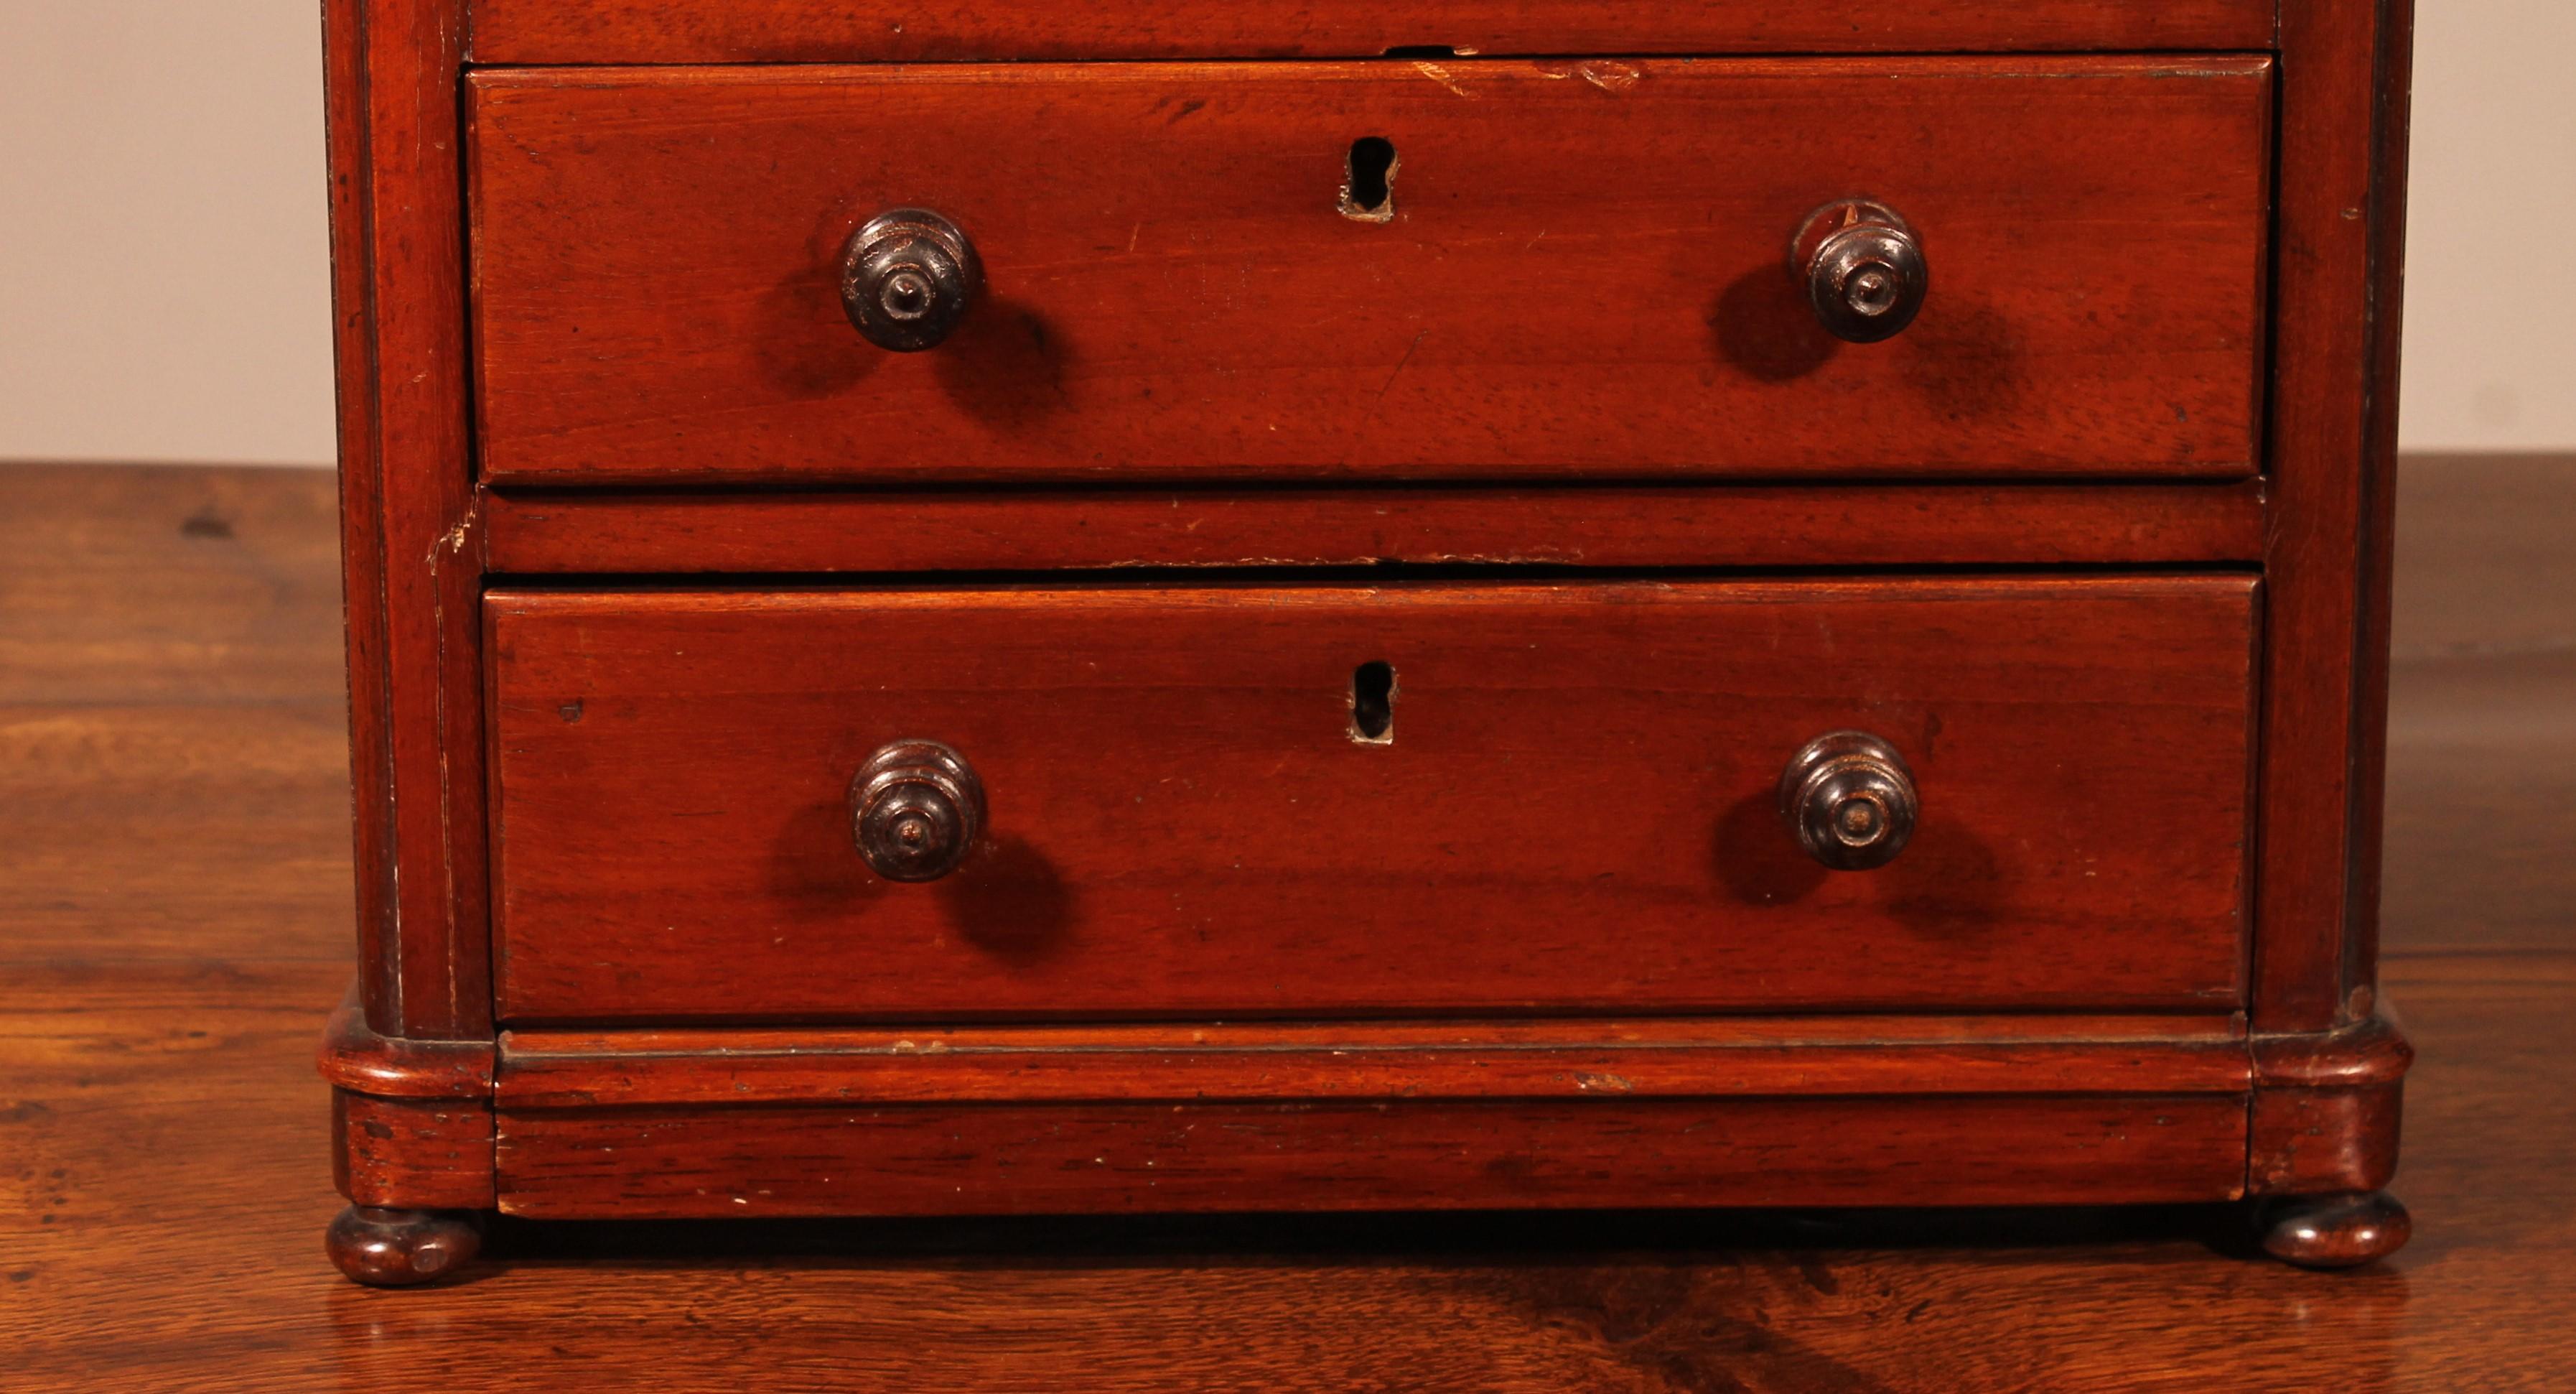 Lovely little mahogany miniature chest of drawers from the 19th century from England
chest of drawers with a double drawer in the top and the bottom drawer with the plinth integrated into the drawer which is rare
in very good condition and beautiful